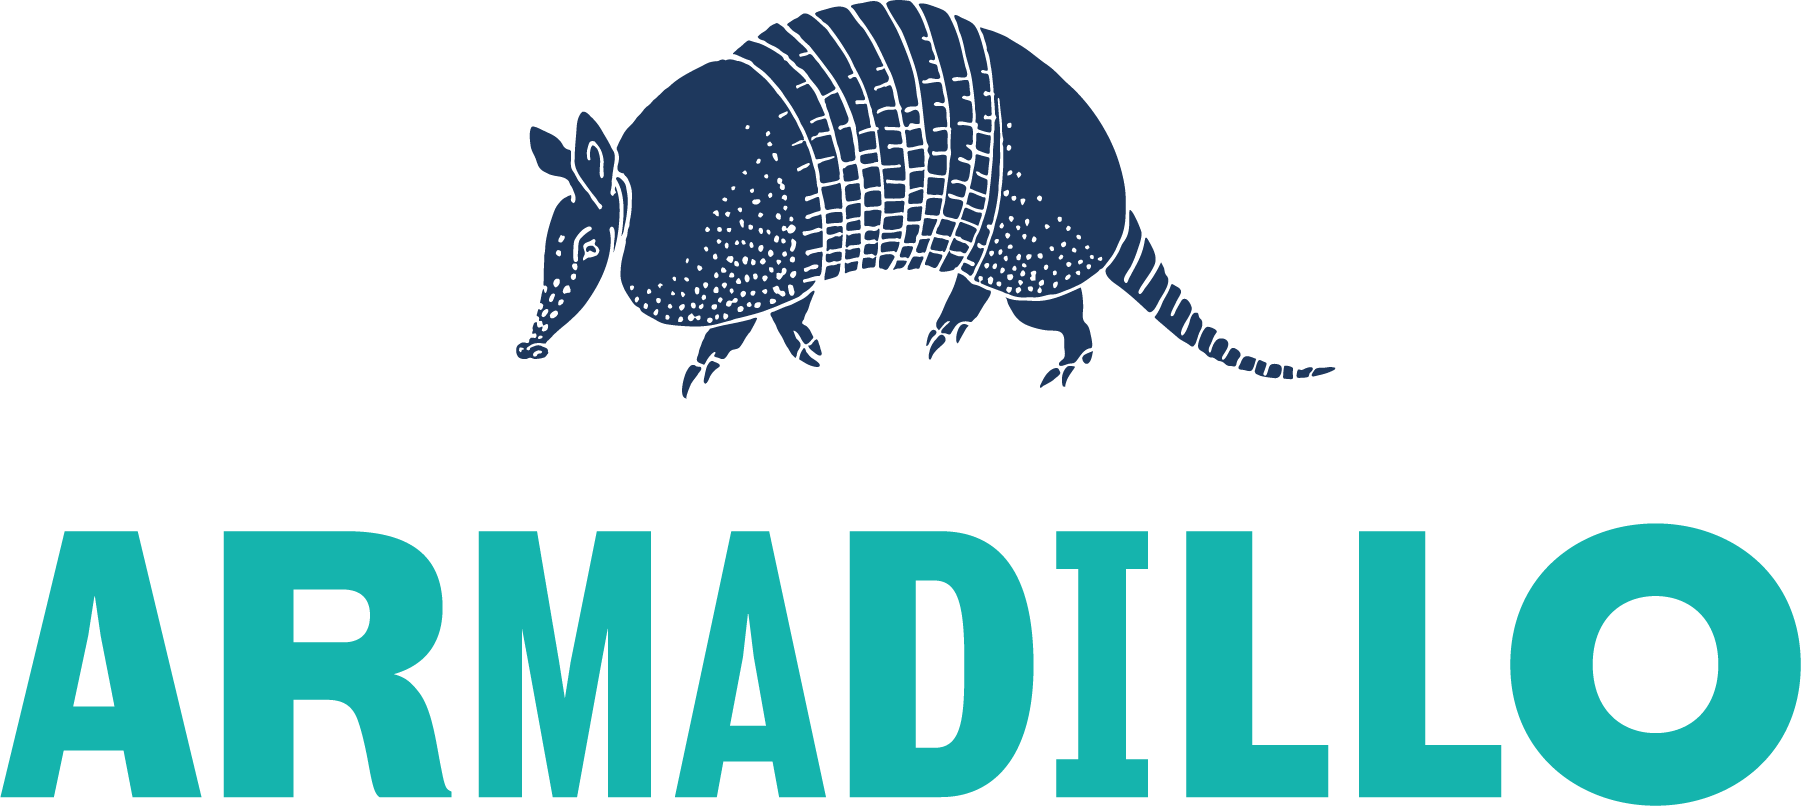 A Blue Armadillo With Text